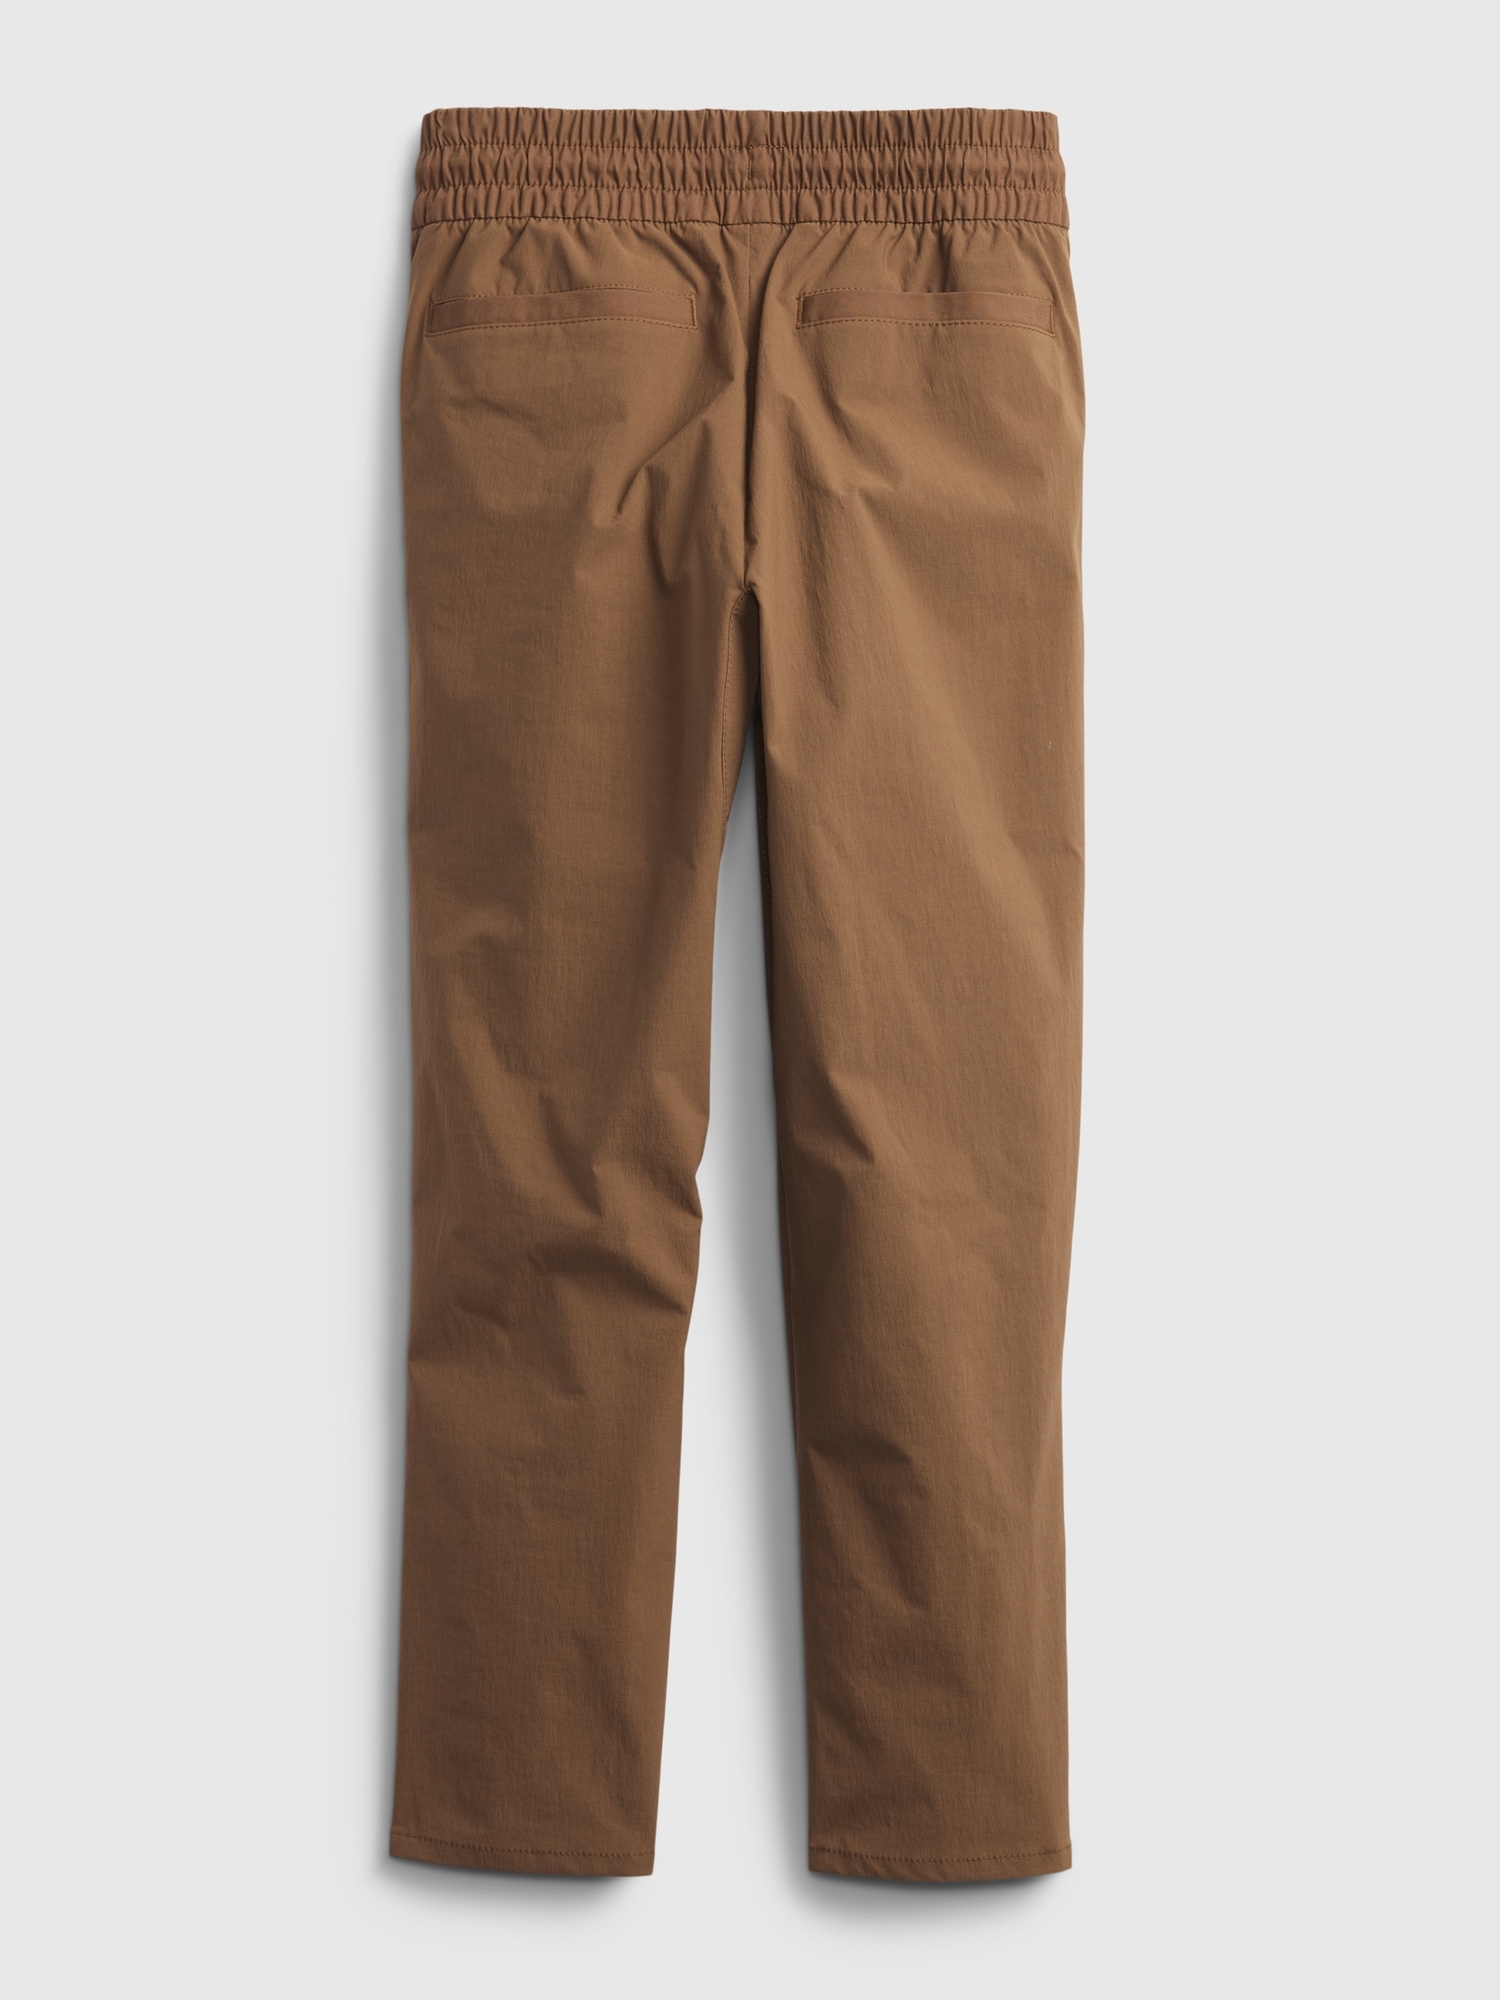 Kids Pull-On Hybrid Pants with QuickDry | Gap